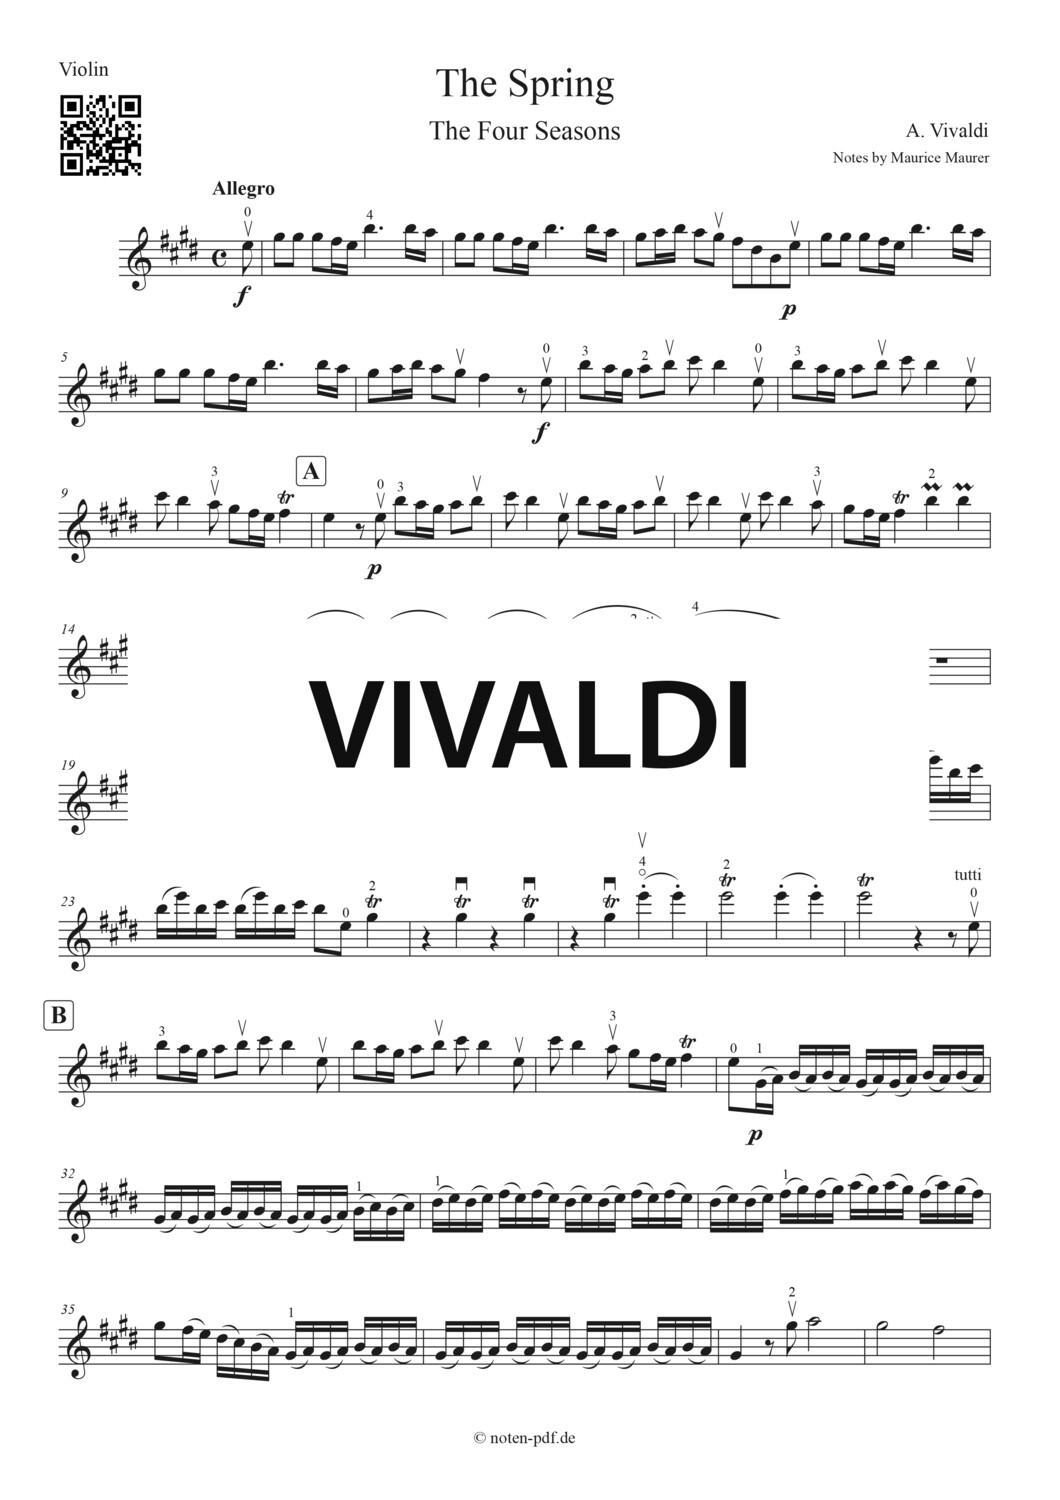 Vivaldi: The Spring from "The Four Seasons" - 1. Movement